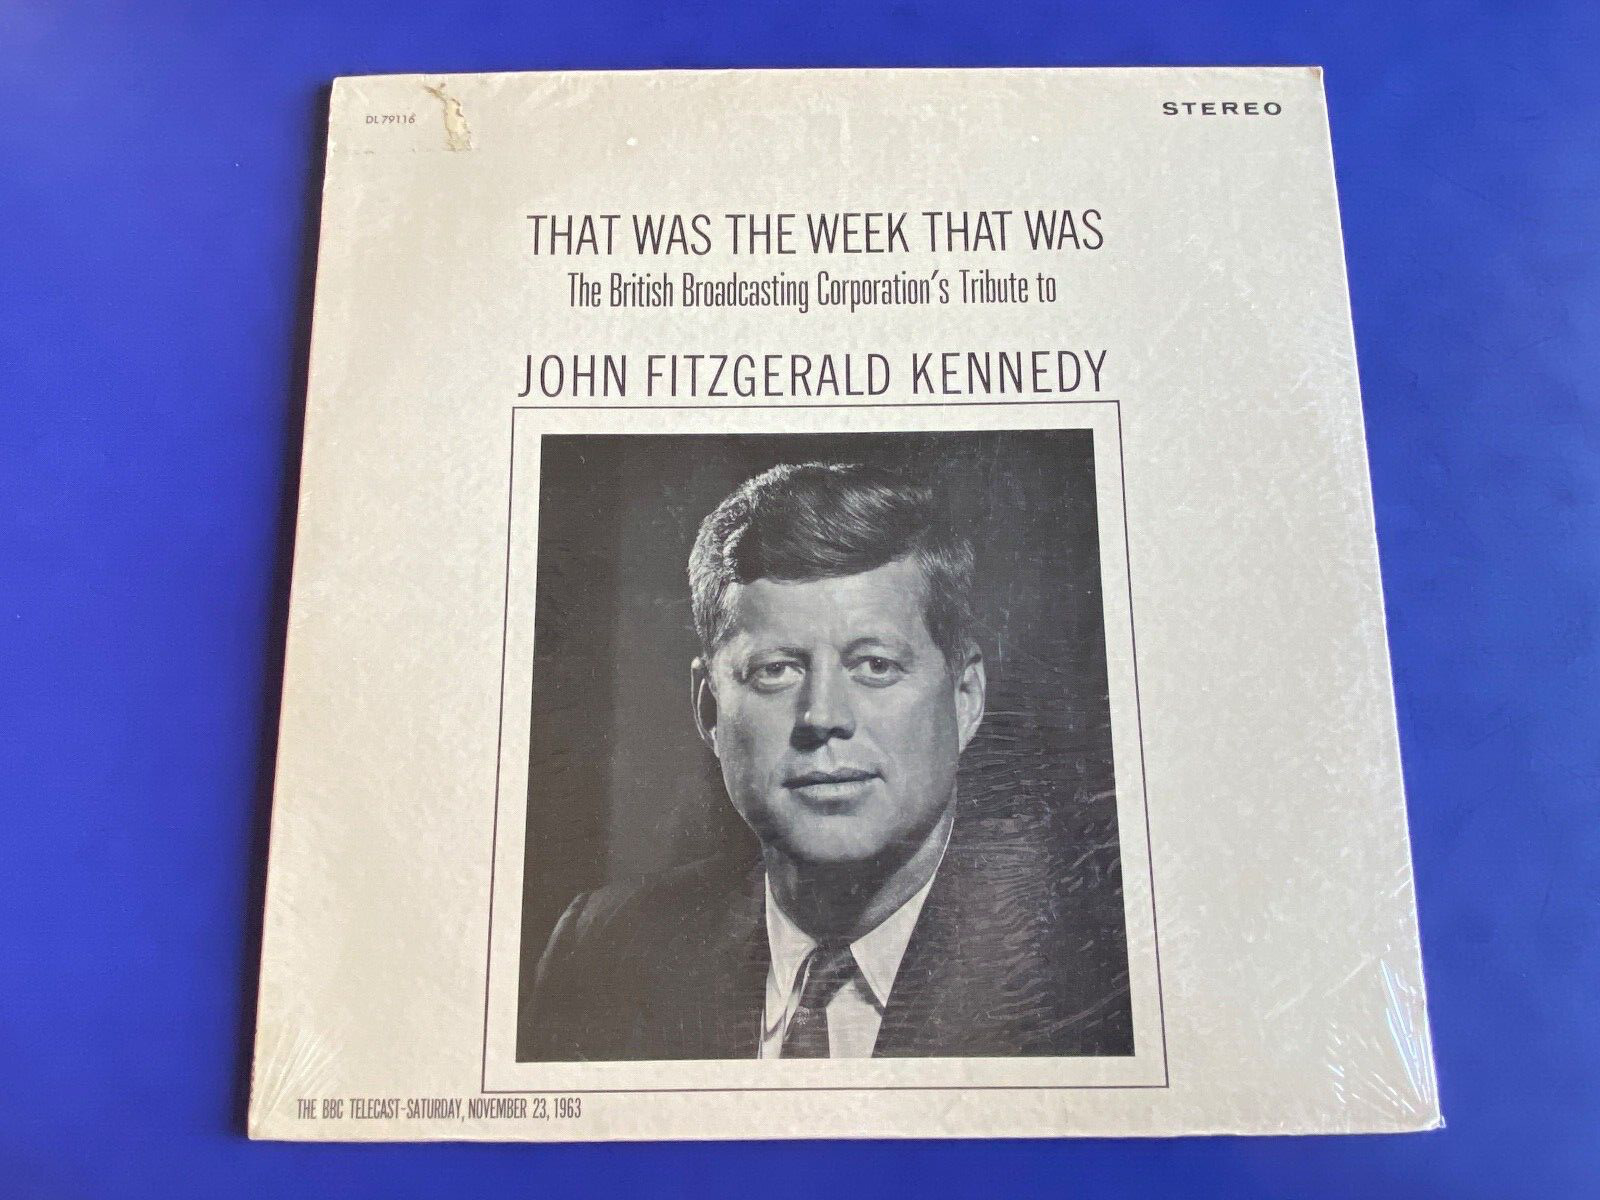 SEALED John F. Kennedy that was the week that was Decca  DL 79116 stereo  MINT